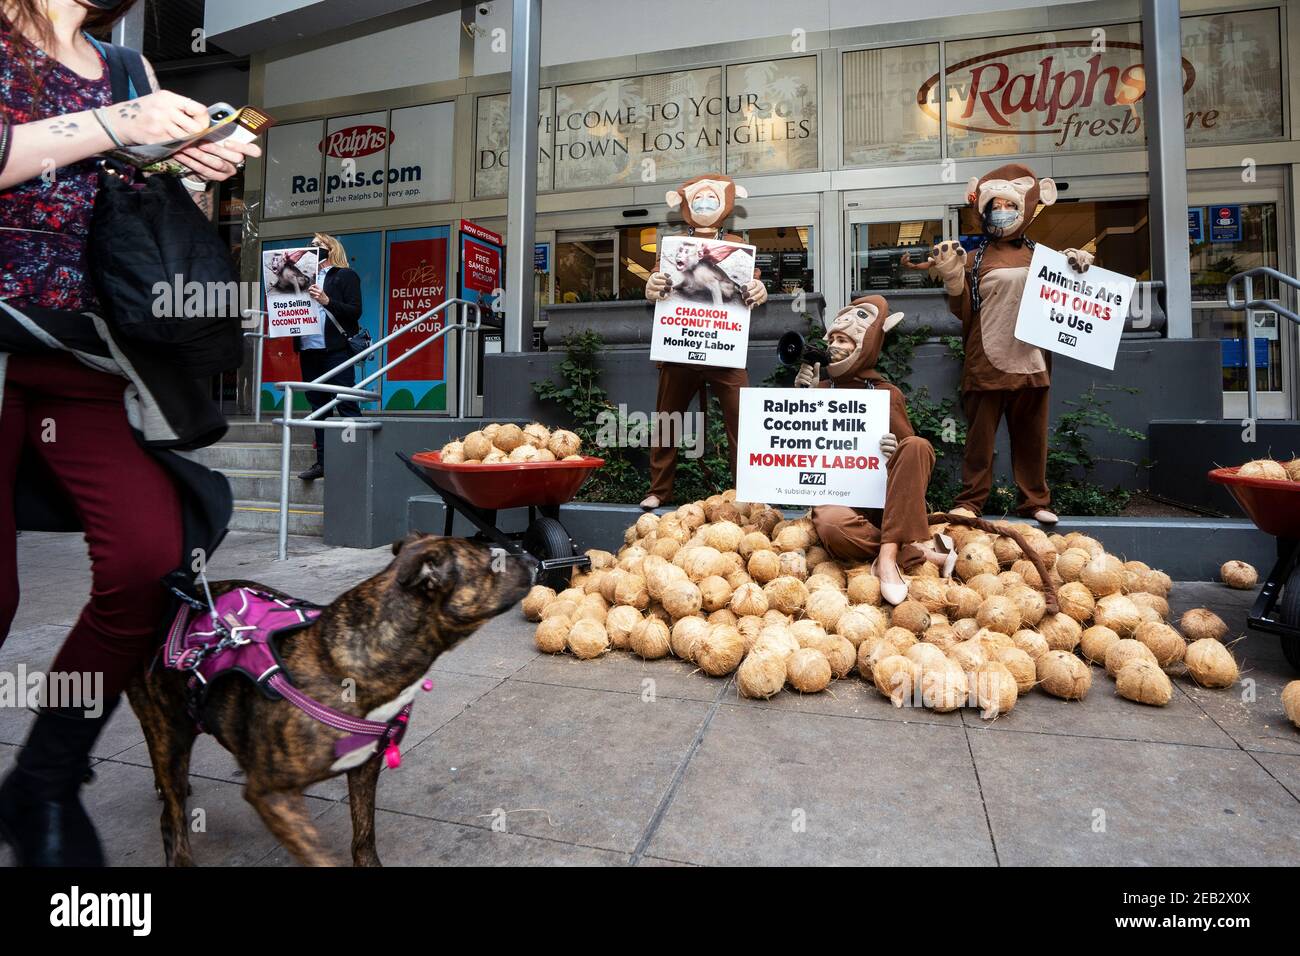 Los Angeles, United States. 11th Feb, 2021. PETA activists dressed in monkey costumes hold placards and coconuts during a protest against Thailand's Chaokoh brand for allegedly forcing monkeys to climb up trees to collect coconuts and keeping them in cruel conditions. Major U.S. retailers such as Costco and Target stopped selling Chaokoh coconut milk over allegations of forced monkey labor. Credit: SOPA Images Limited/Alamy Live News Stock Photo